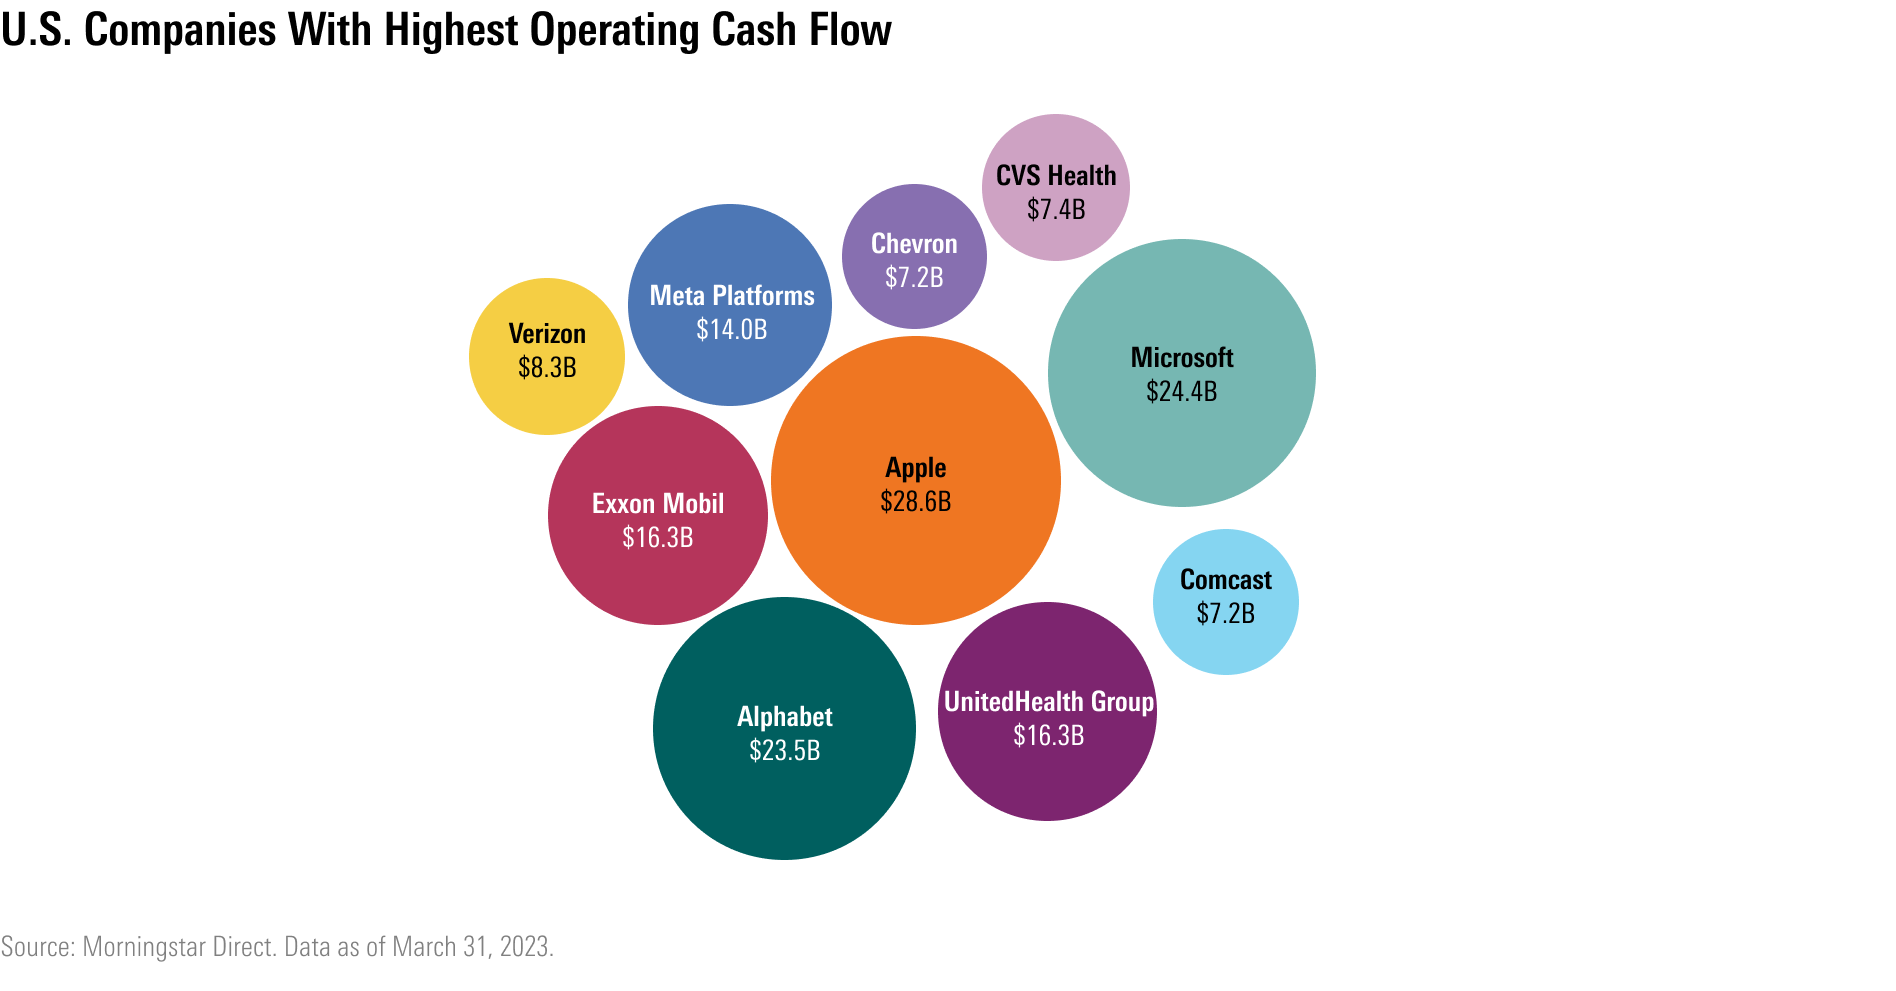 Bubble chart showing U.S. Companies With Highest Operating Cash Flow